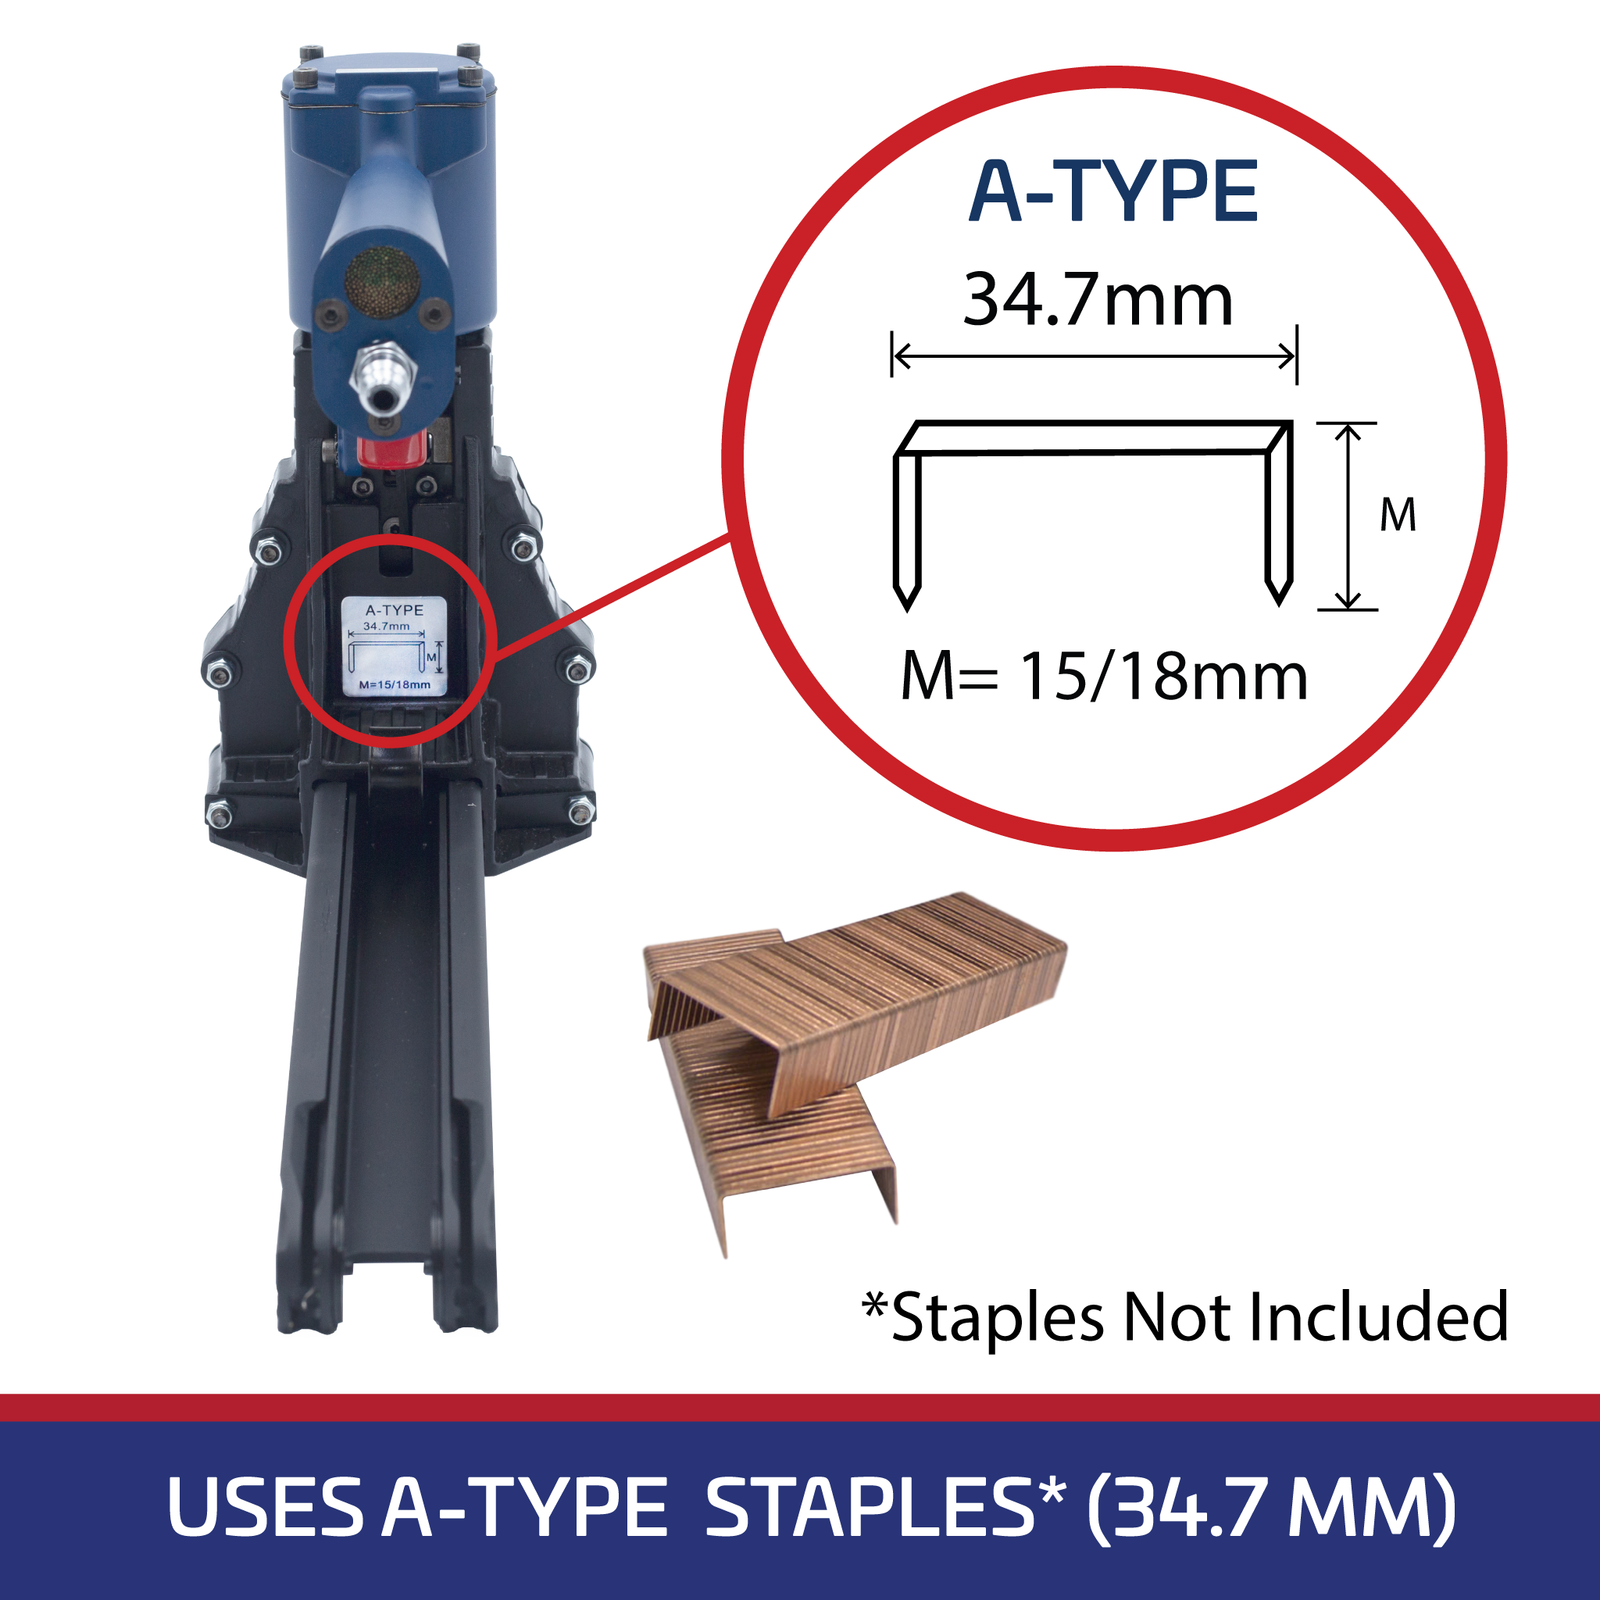 blue and red infographic showing measurements of acceptable staples for a blue and black staple gun is 34.7 mm